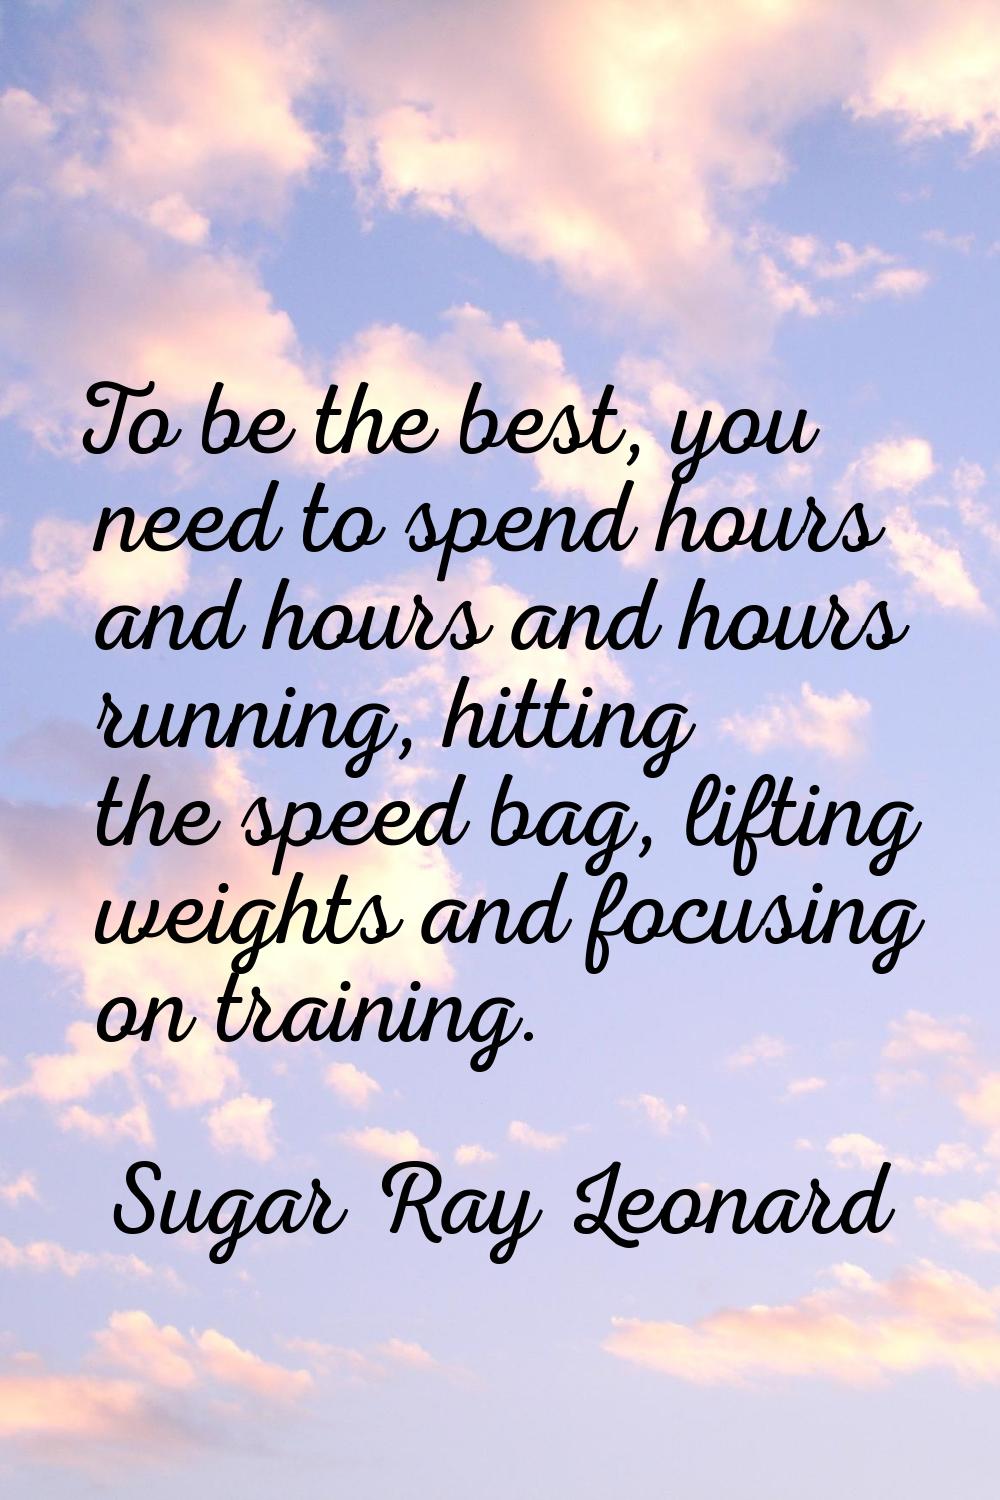 To be the best, you need to spend hours and hours and hours running, hitting the speed bag, lifting